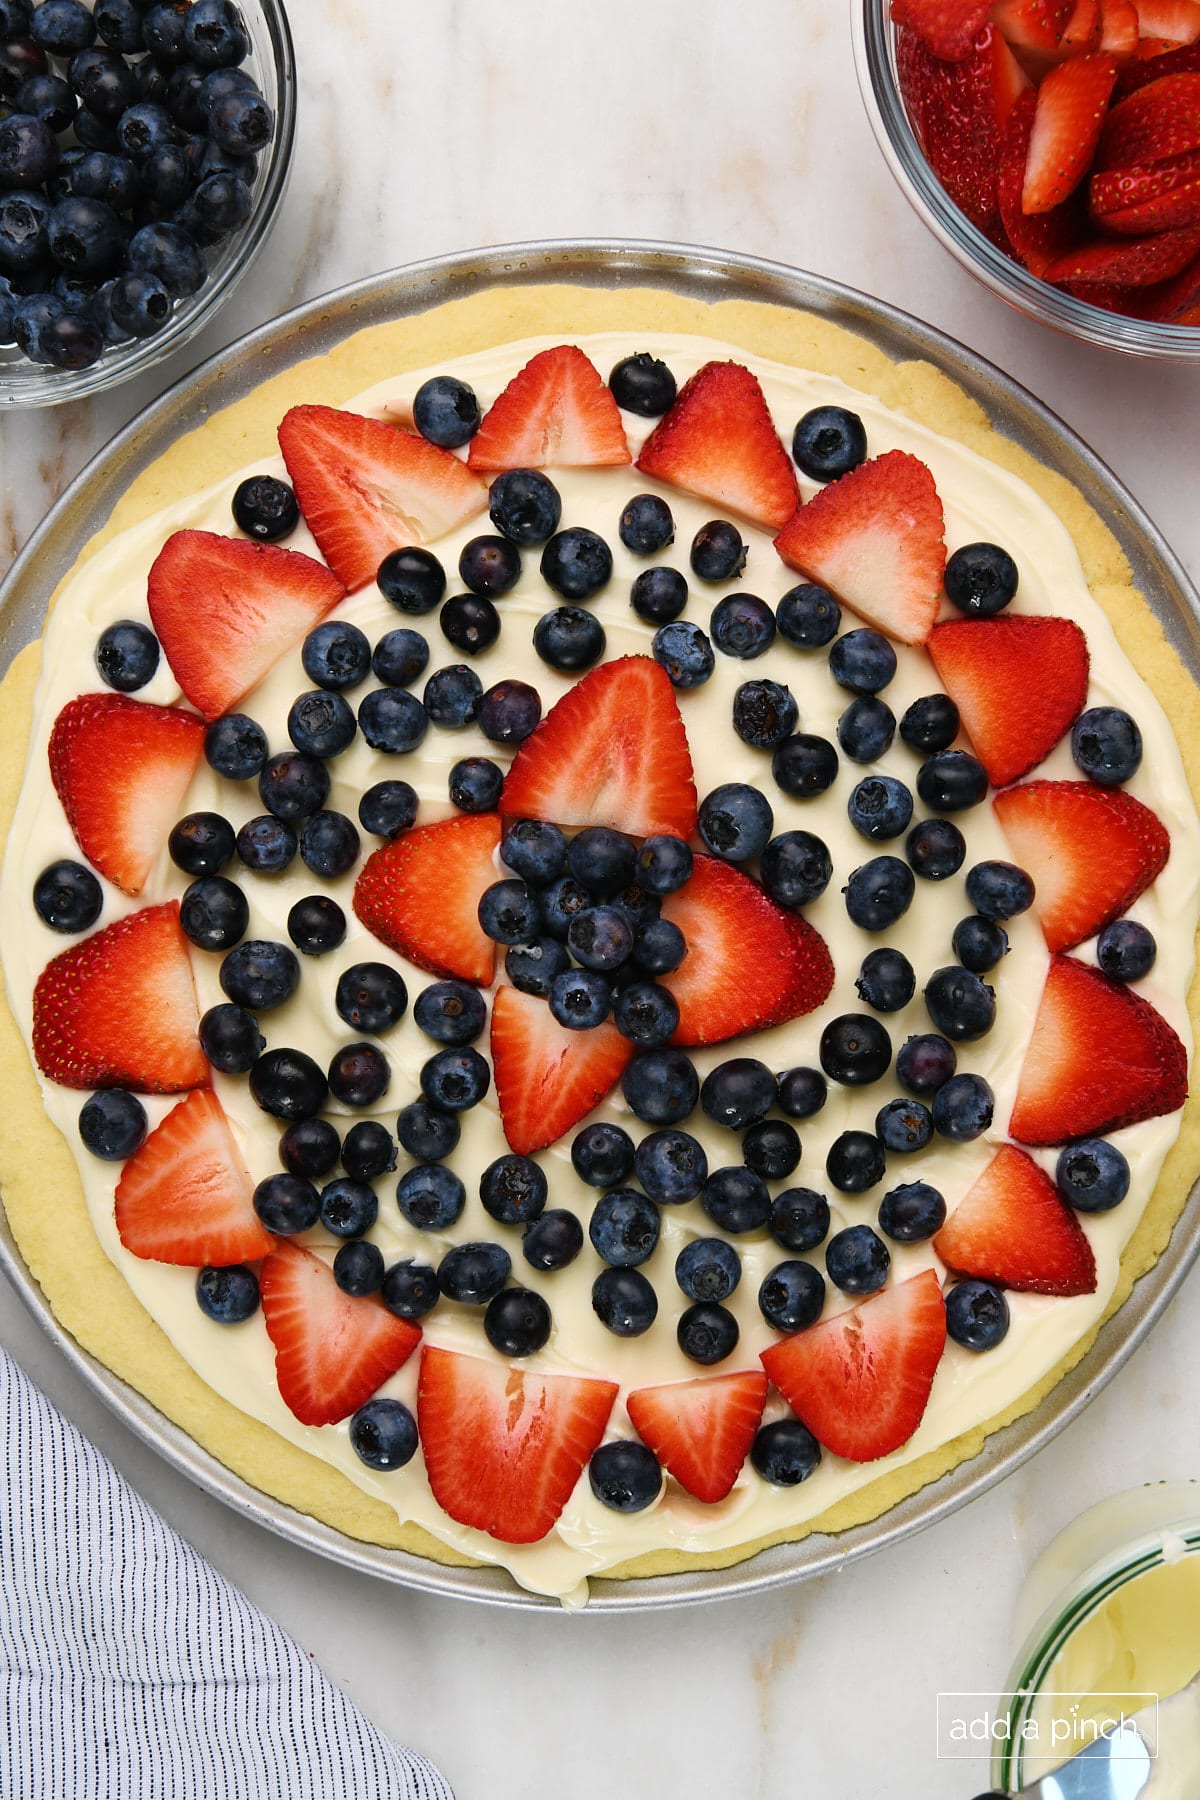 Fruit pizza on a marble surface surrounded by bowls of blueberries, strawberries, and cream cheese frosting.